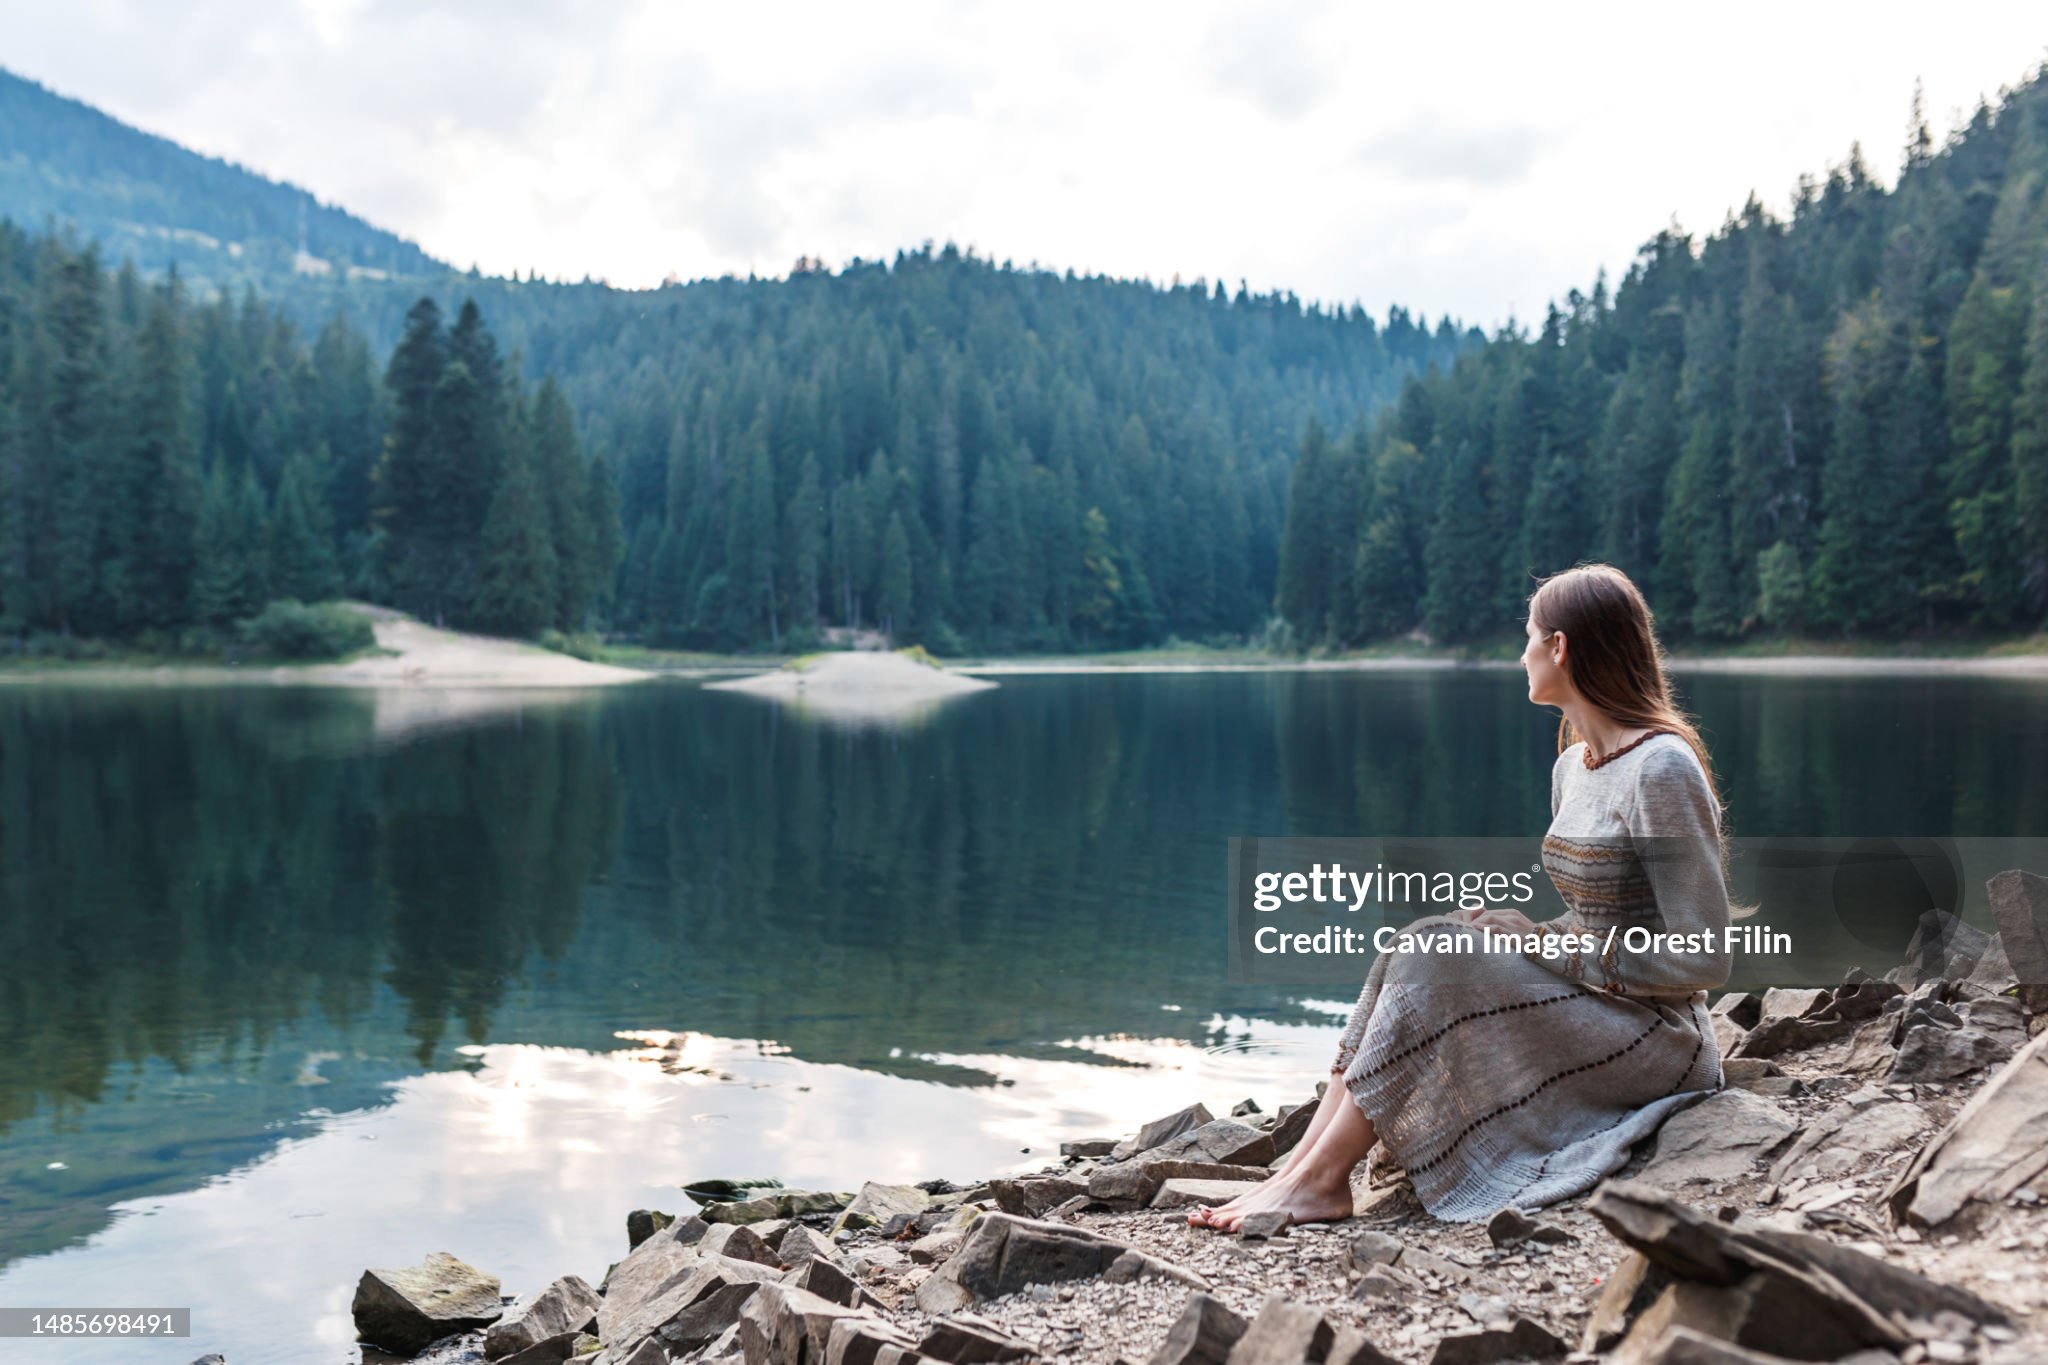 https://media.gettyimages.com/id/1485698491/photo/woman-in-a-dress-near-the-lake-in-the-forest-in-the-mountains.jpg?s=2048x2048&amp;w=gi&amp;k=20&amp;c=hGN9_Wapub3q_Dskjorot_pOuOKW26jIGthG6qQg0Ag=